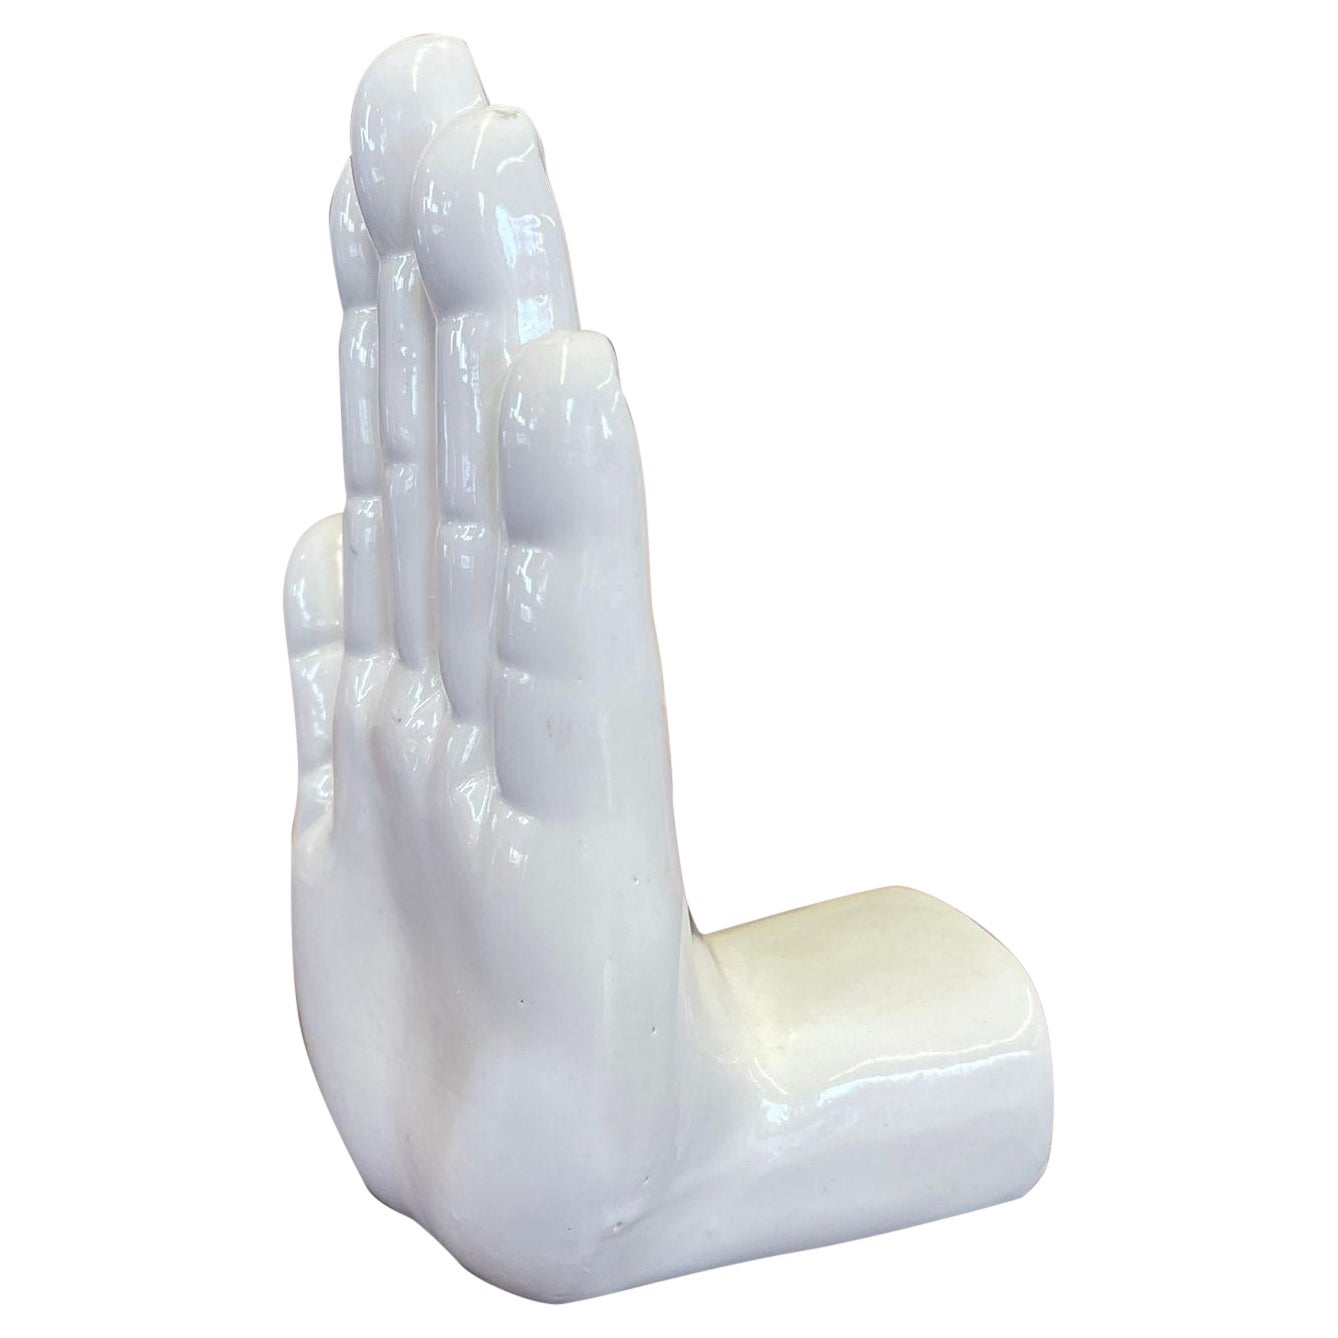 1970s Vintage Inspired White Sculpture of Hand Bookend. For Sale